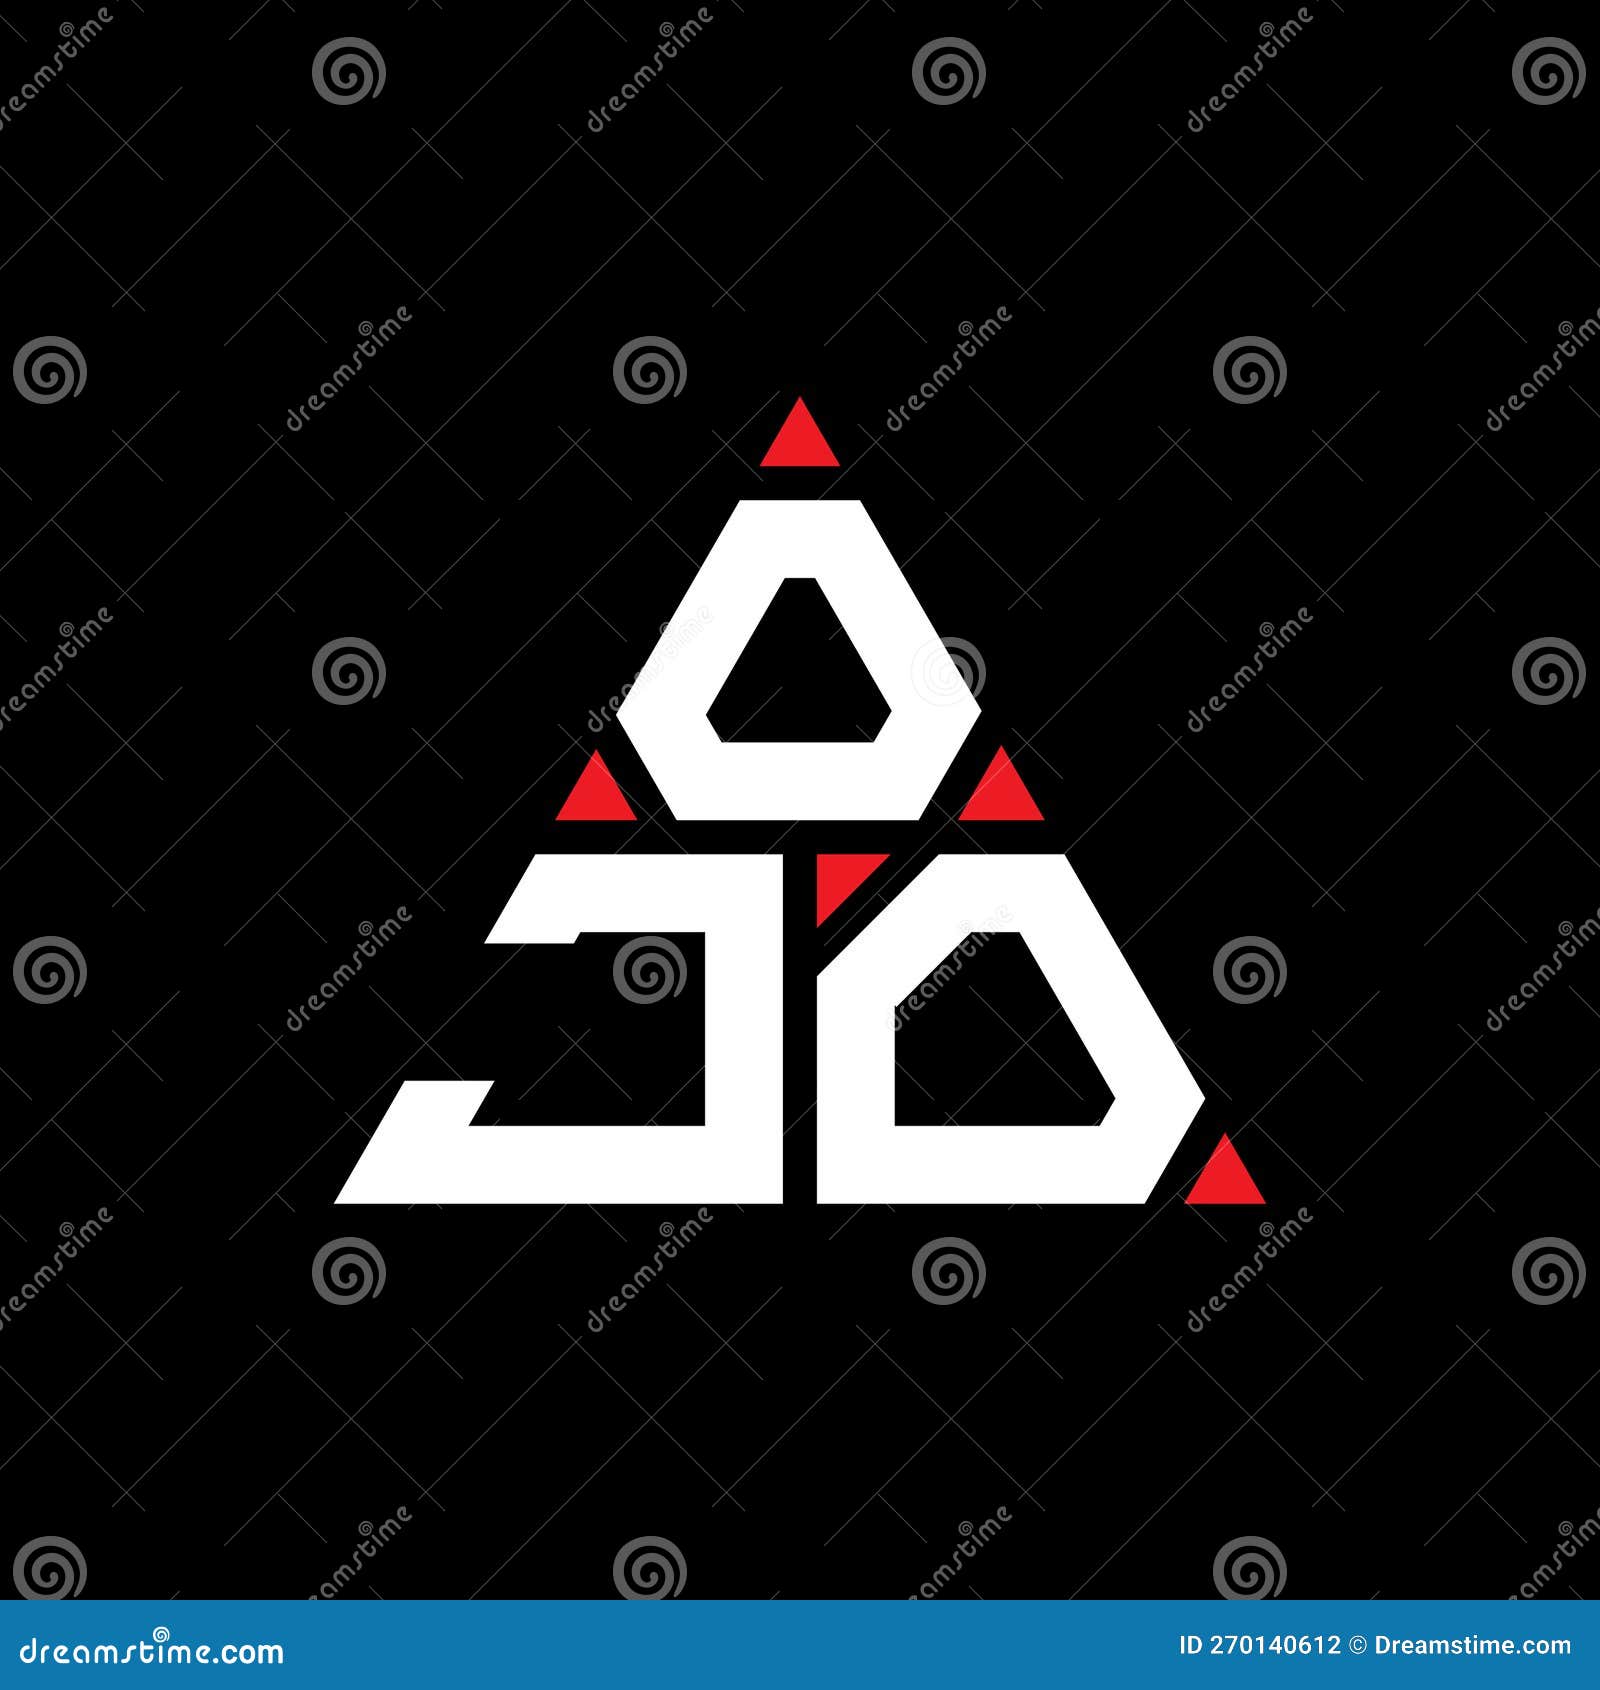 ojo triangle letter logo  with triangle . ojo triangle logo  monogram. ojo triangle  logo template with red